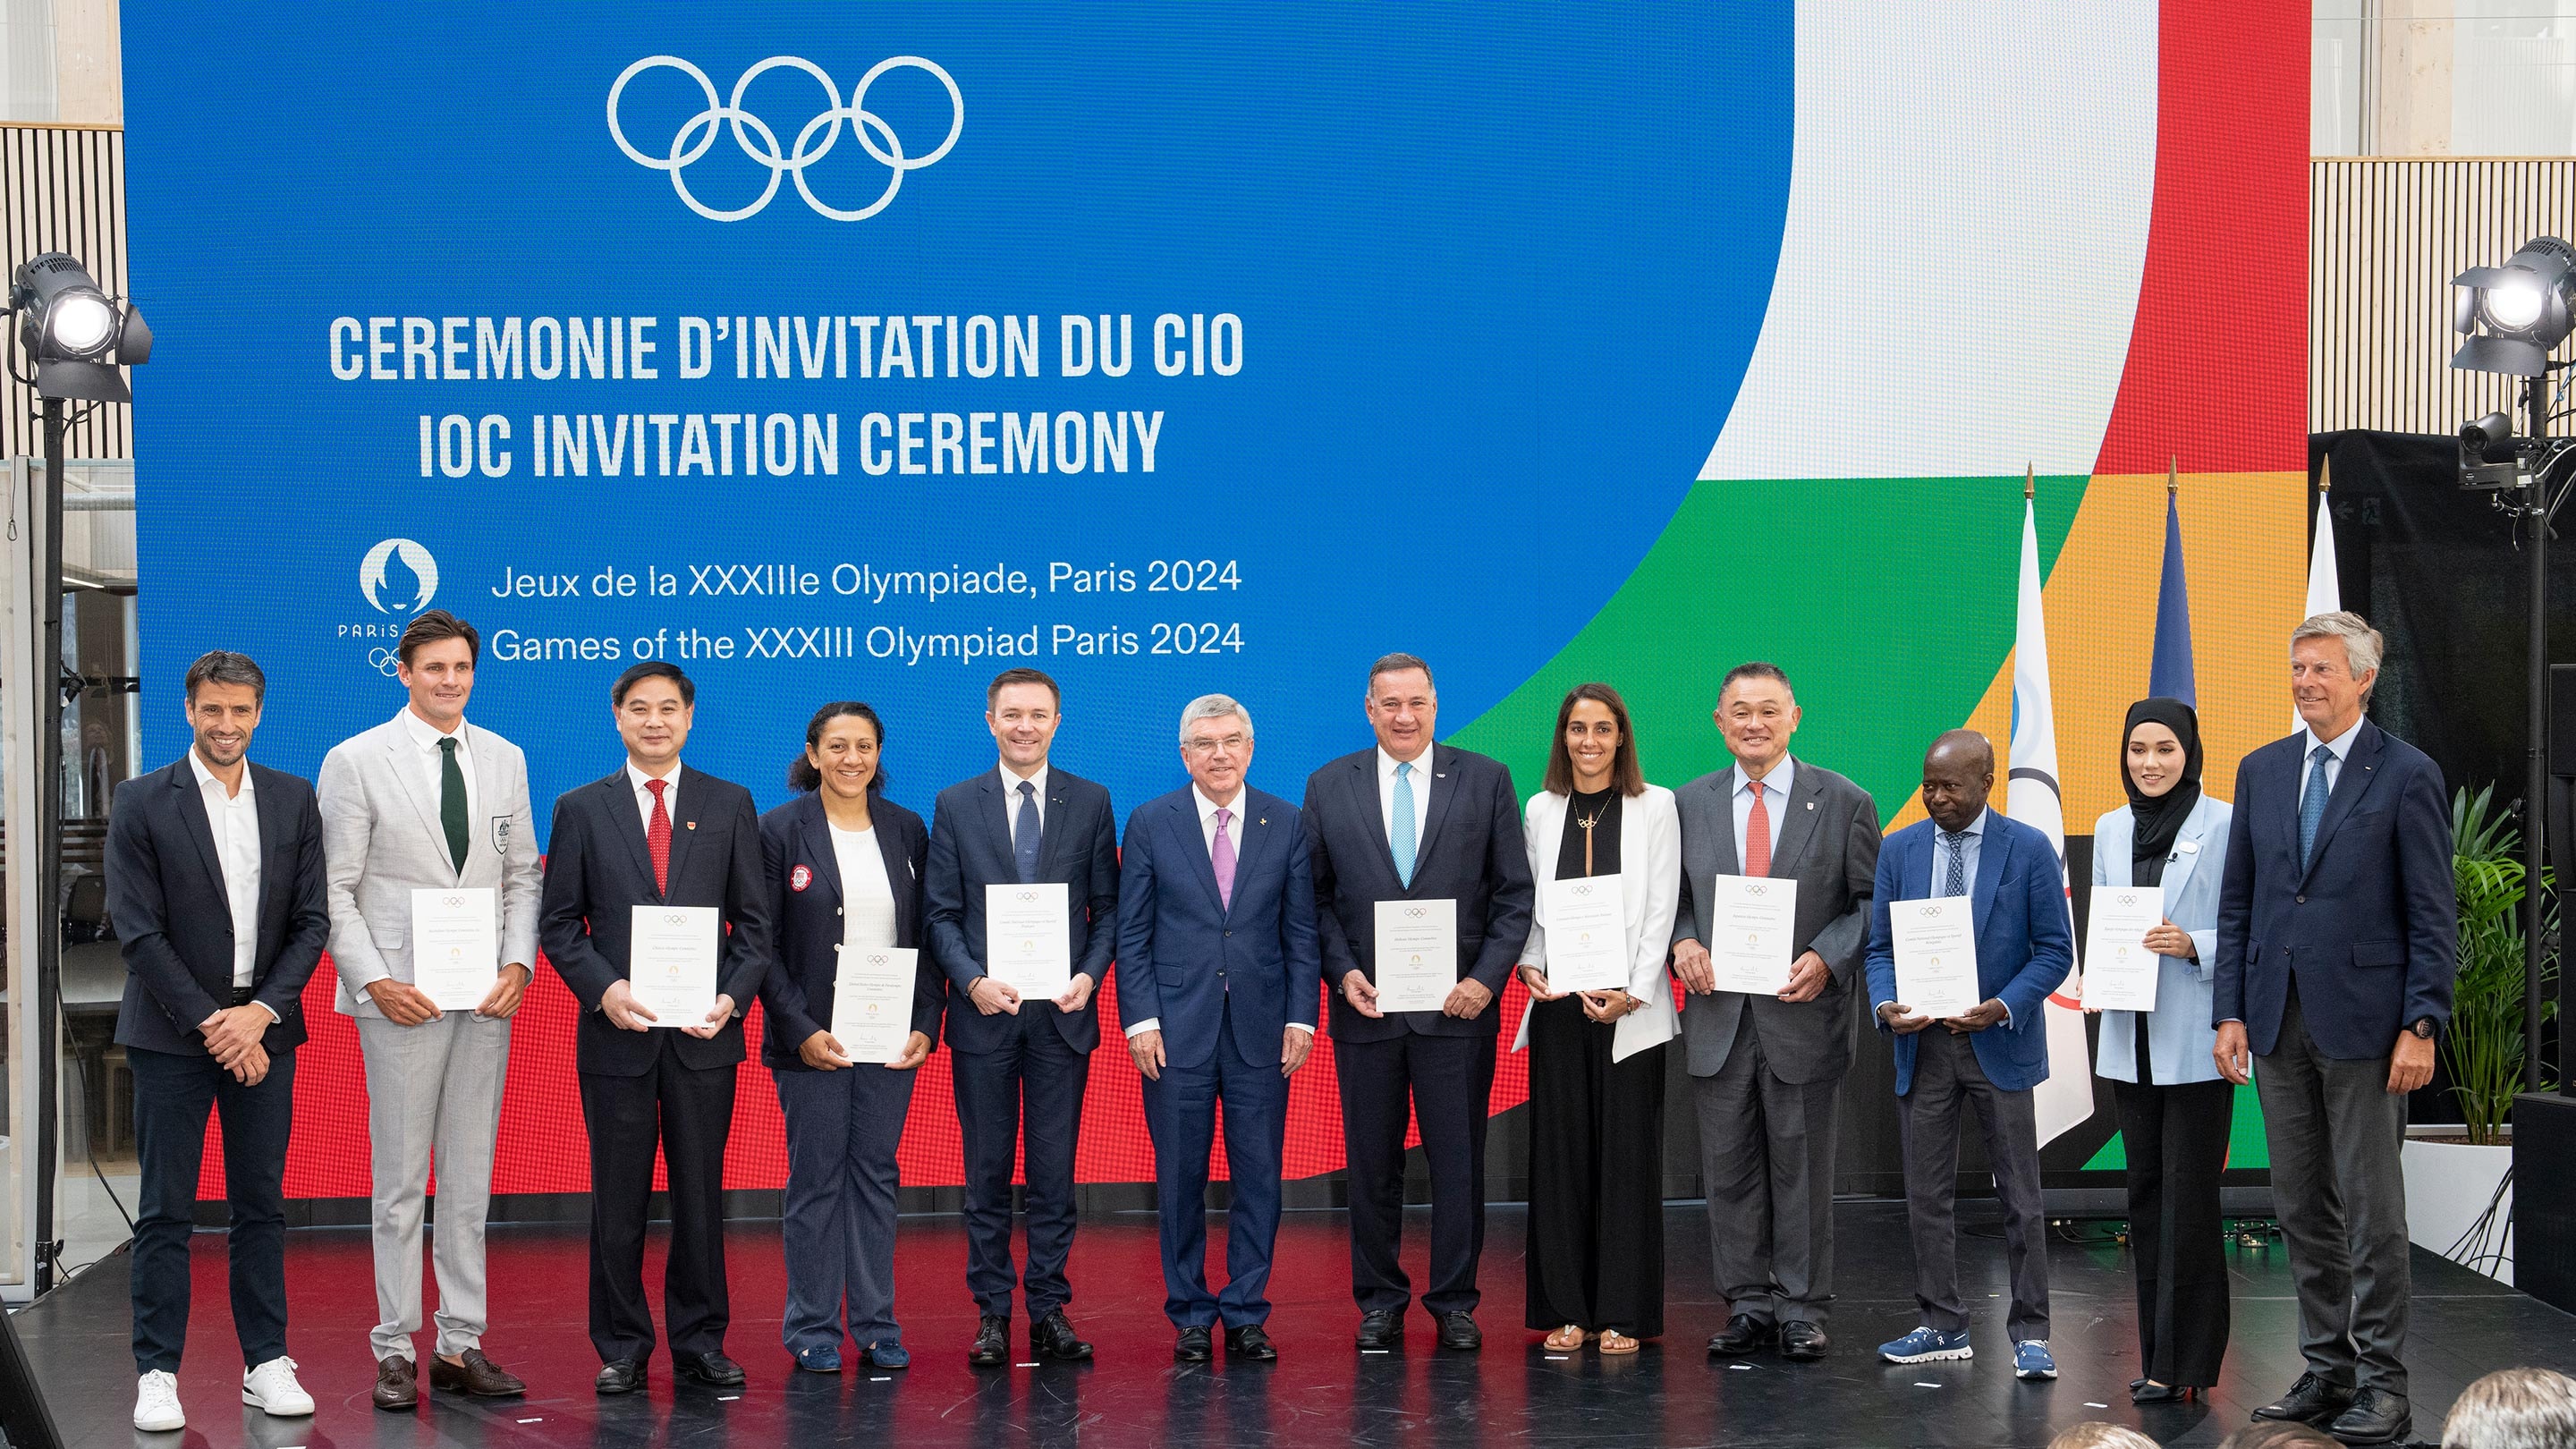 Paris 2024 Olympics: LVMH to Sponsor Olympics in a First for